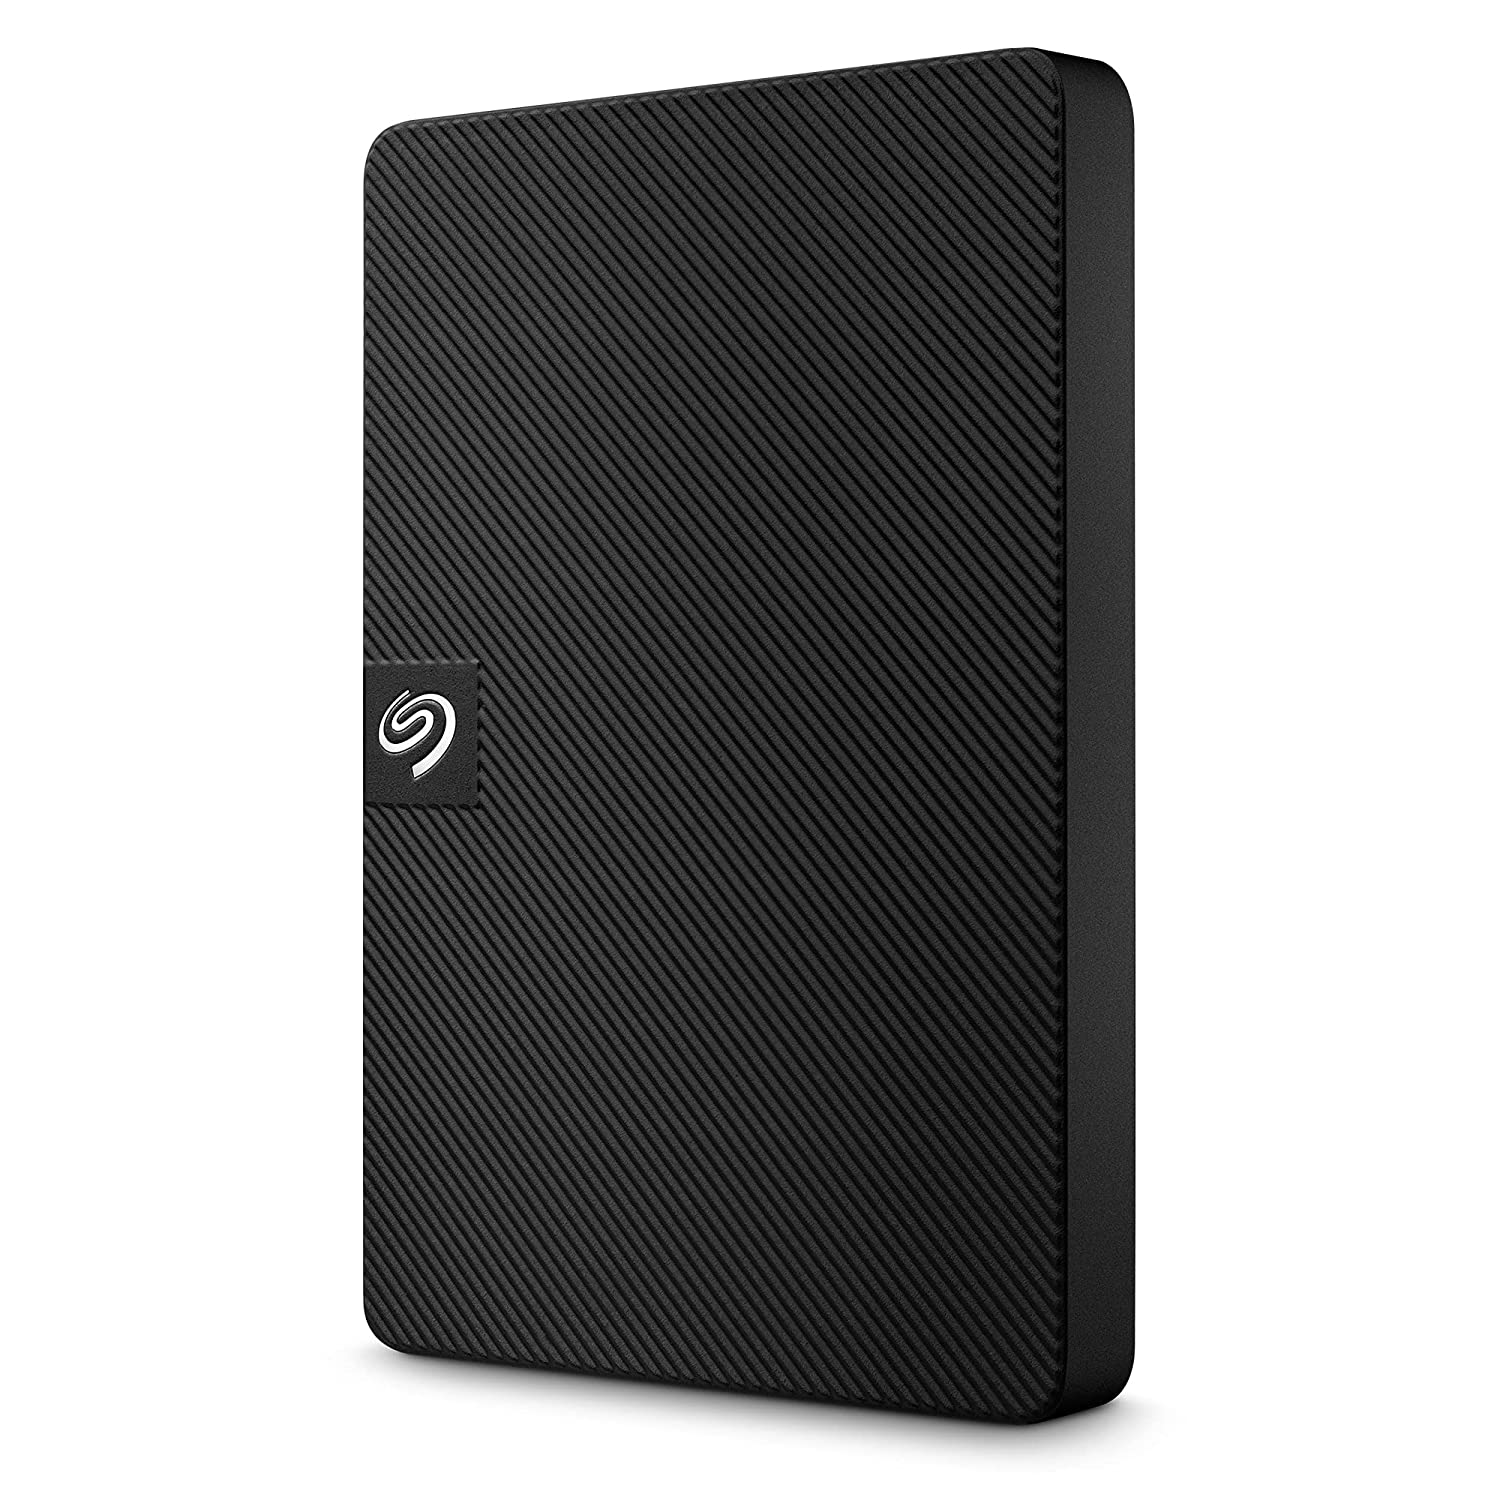 Hard Drive and SSD - Seagate Expansion 1TB External HDD Portable Hard Drive